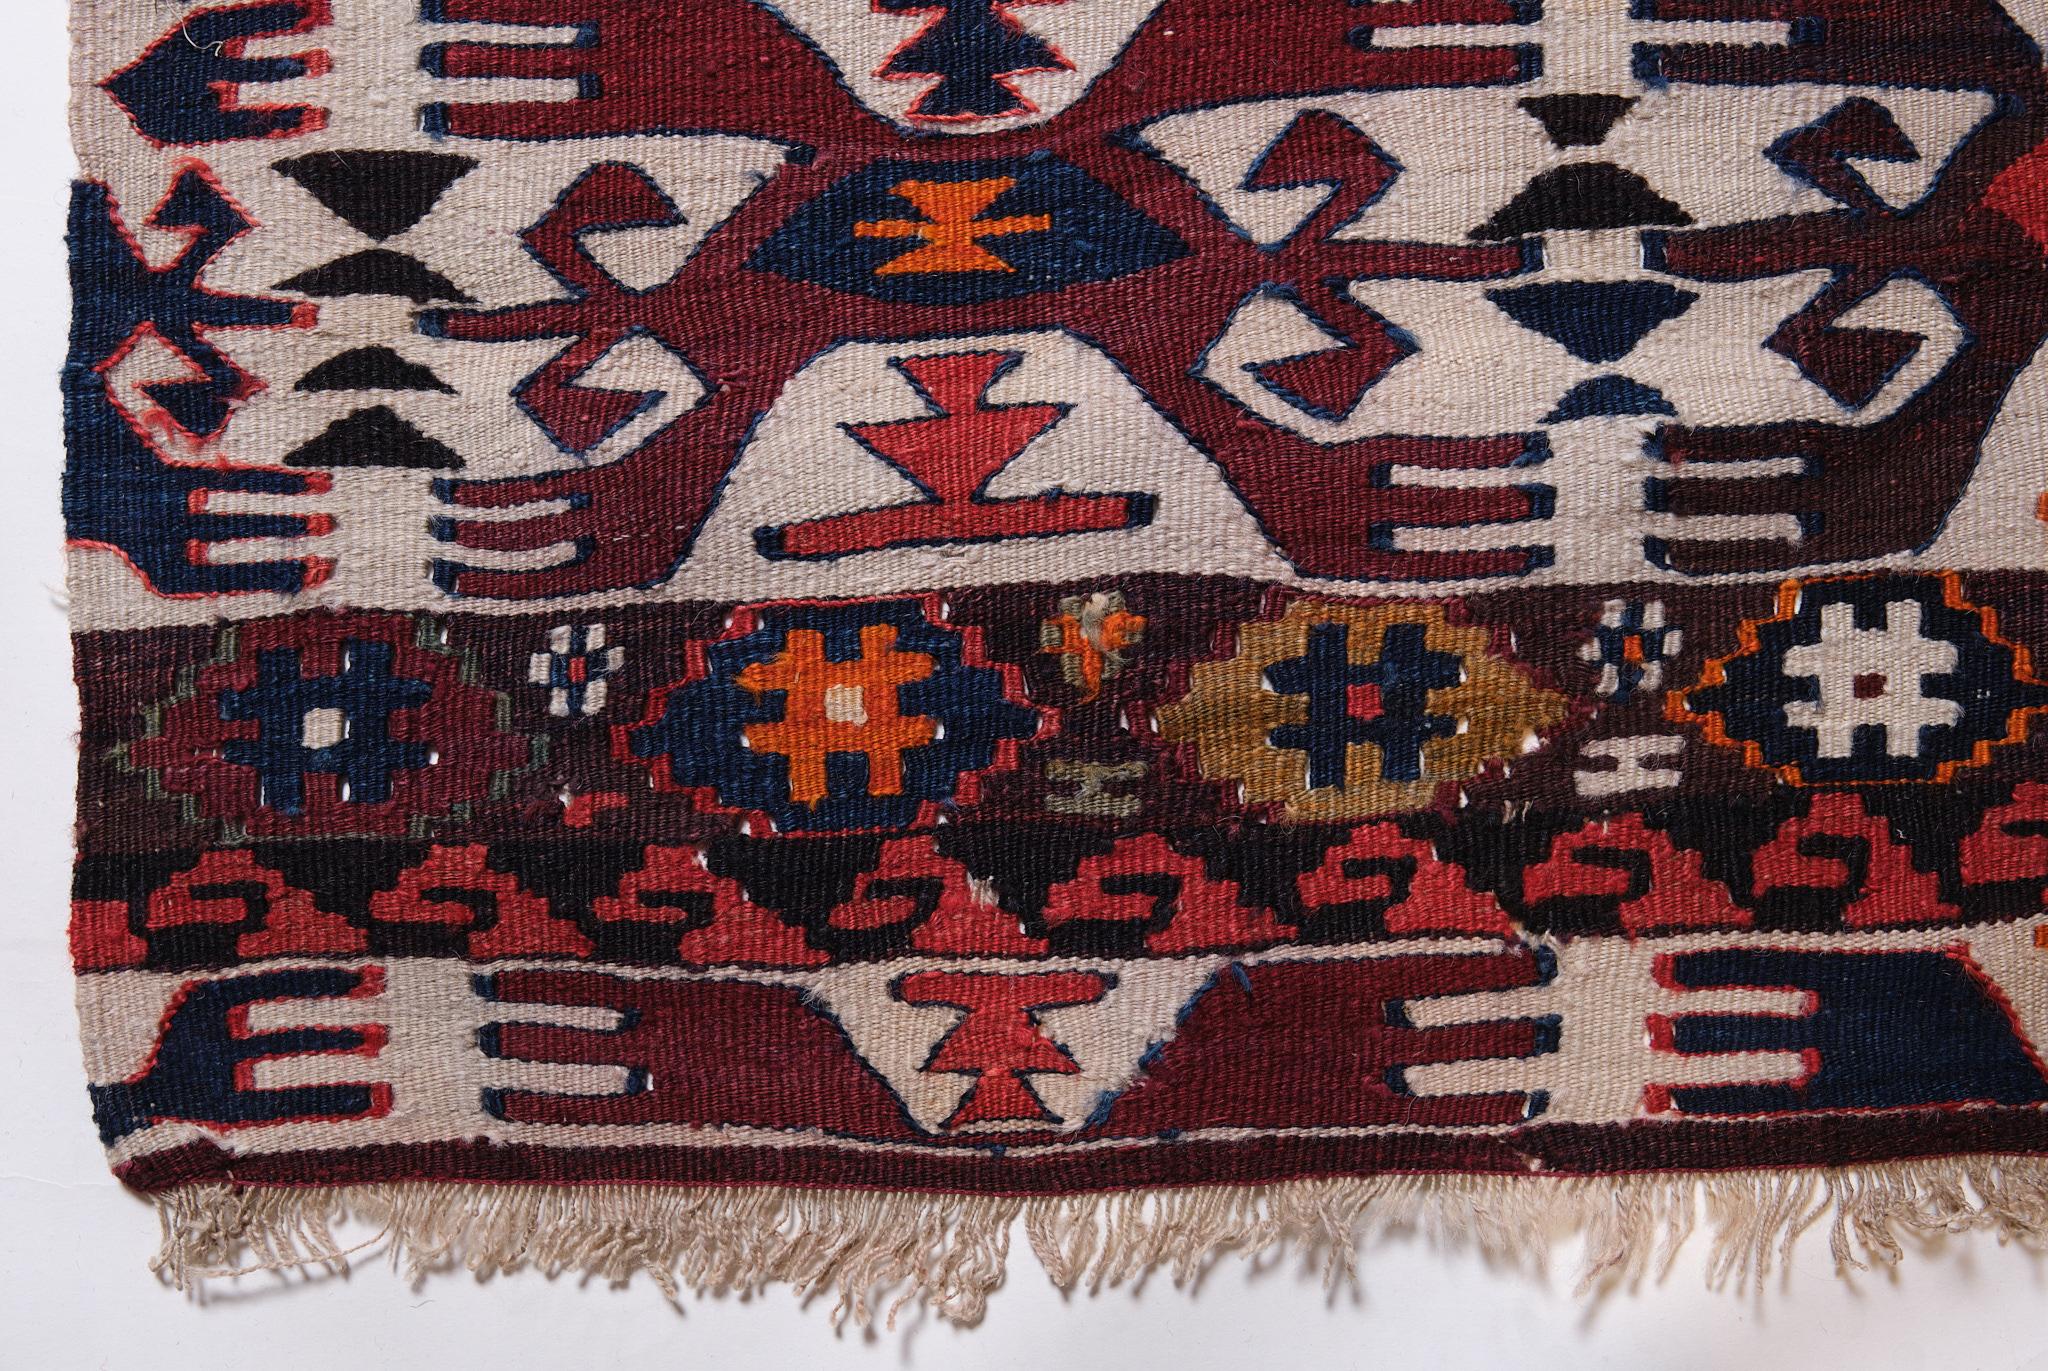 This is a Southern Anatolian Antique Kilim from the Malatya region with a rare and beautiful color composition.

It was originally a kilim with two halves, but this is one half. Encountering such a piece is precious. Half of them are somewhere